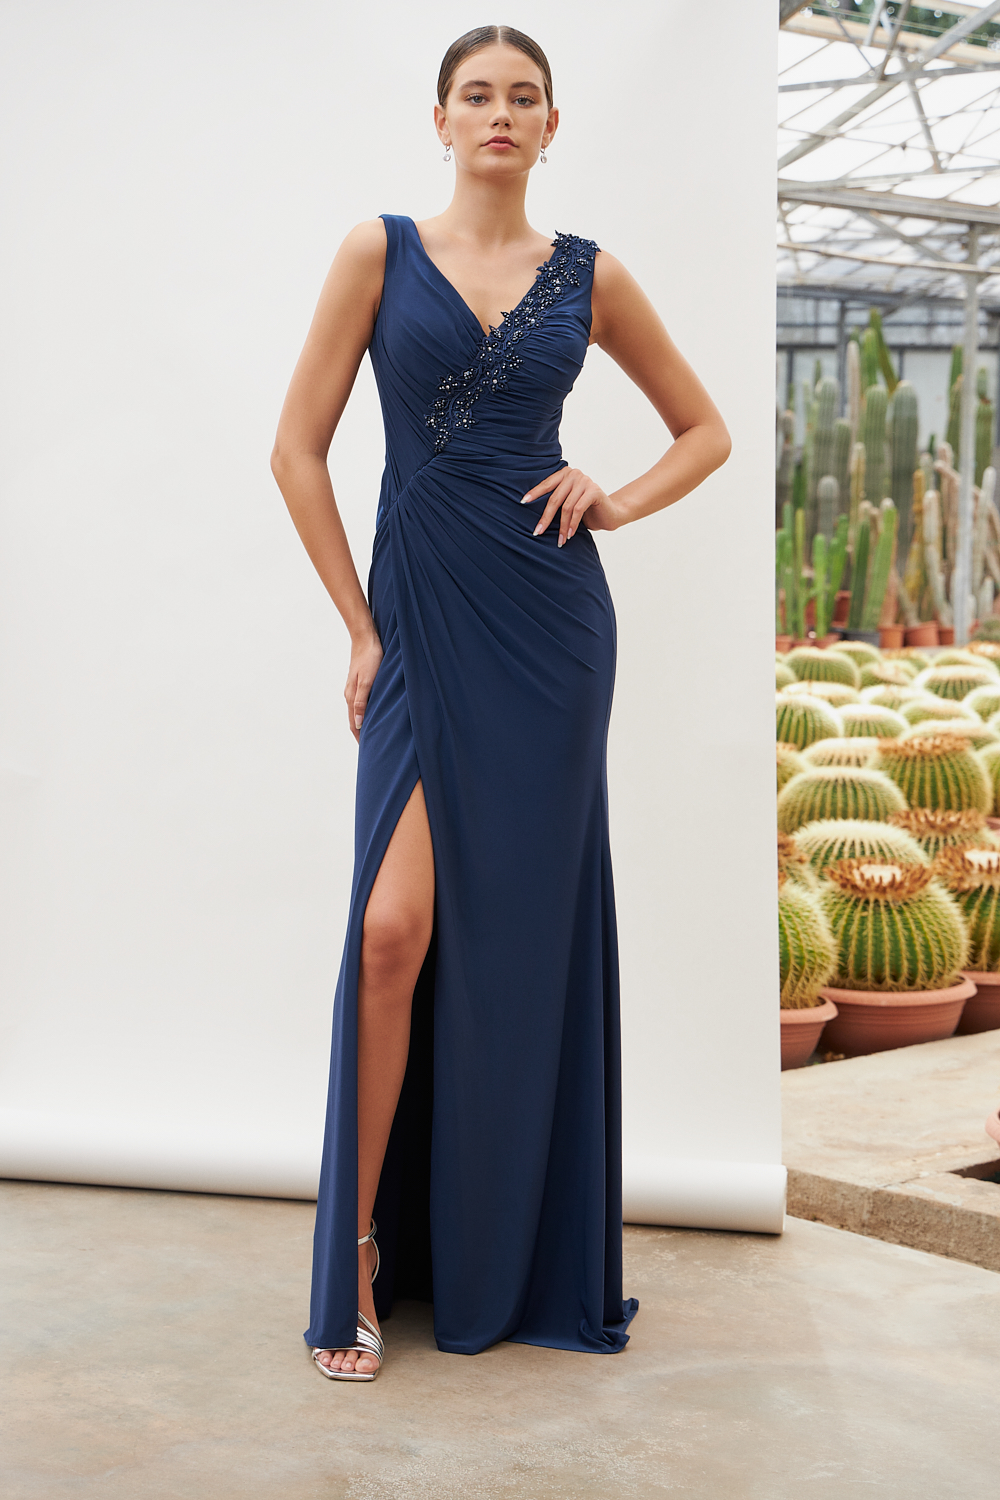 Классические платья / Long classic dress with beaded top, wide straps and opening